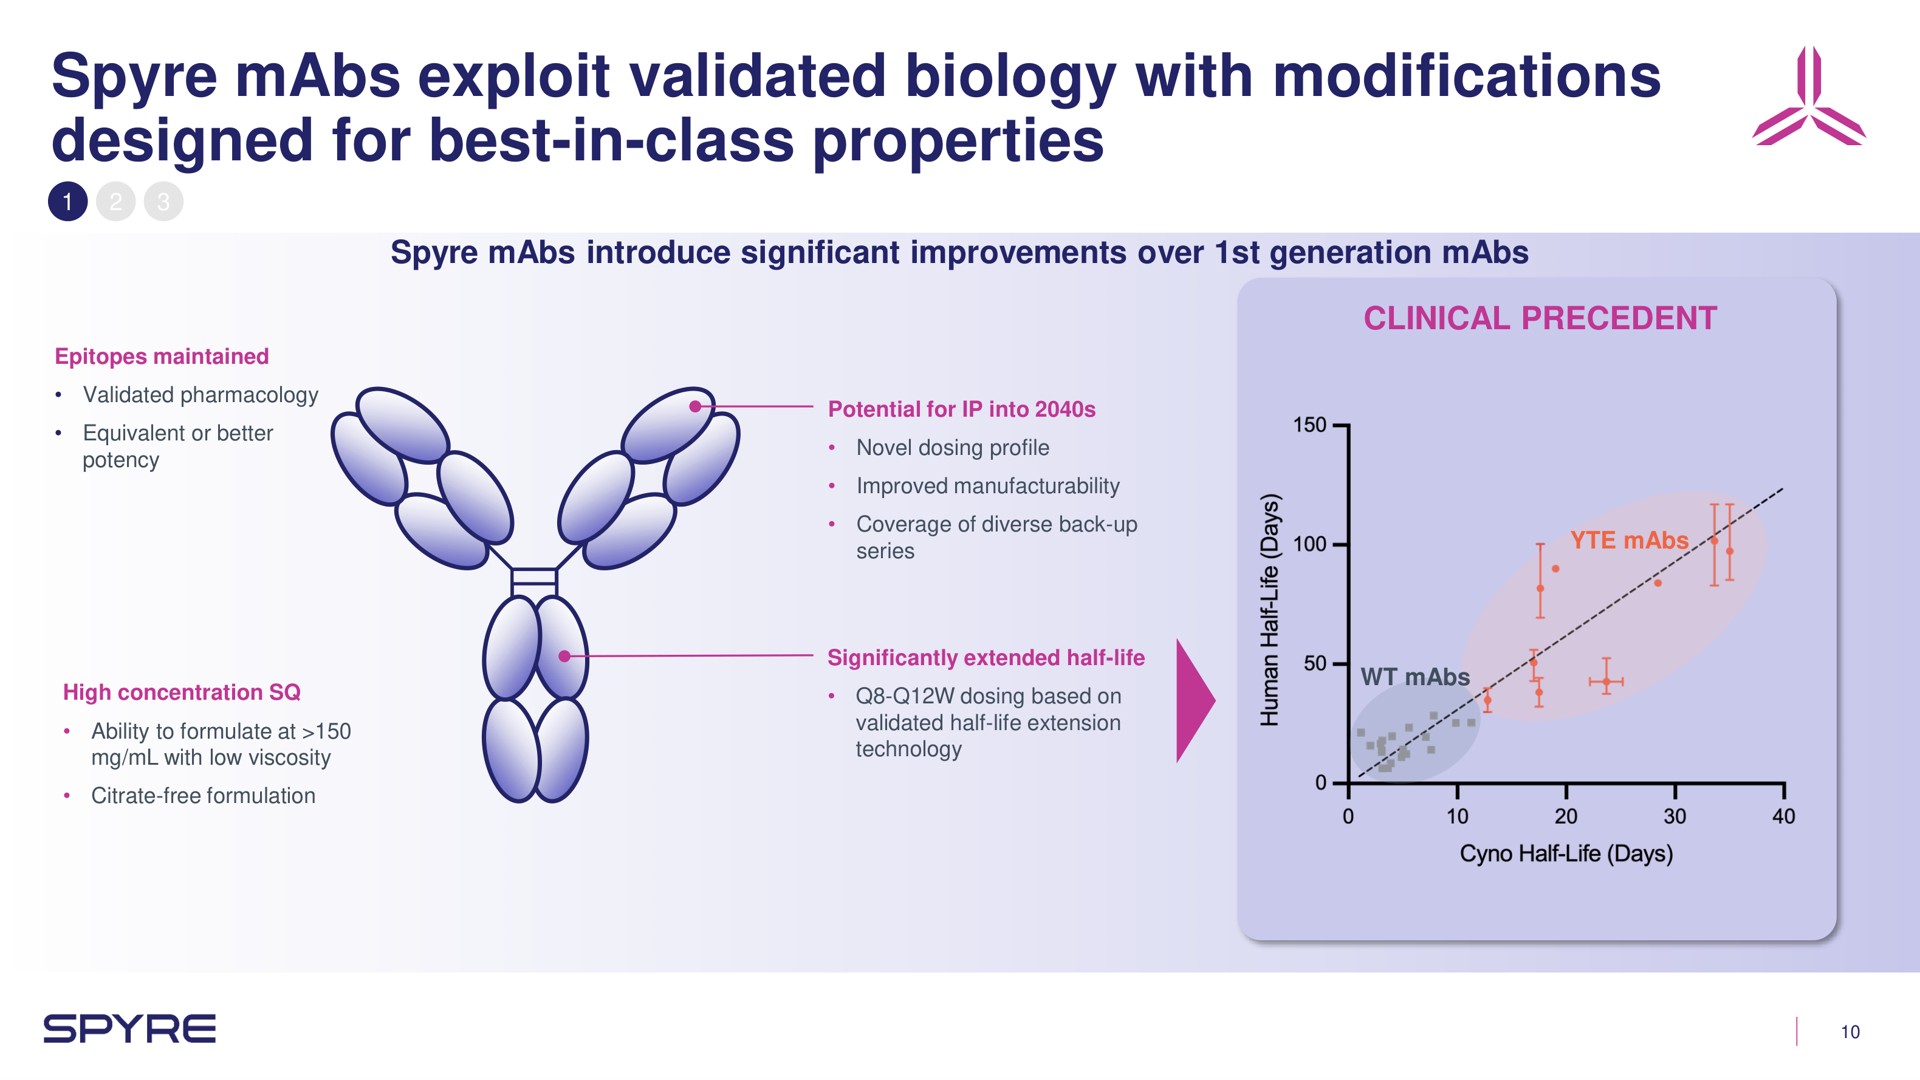 exploit validated biology with modifications designed for best in class properties | Aeglea BioTherapeutics